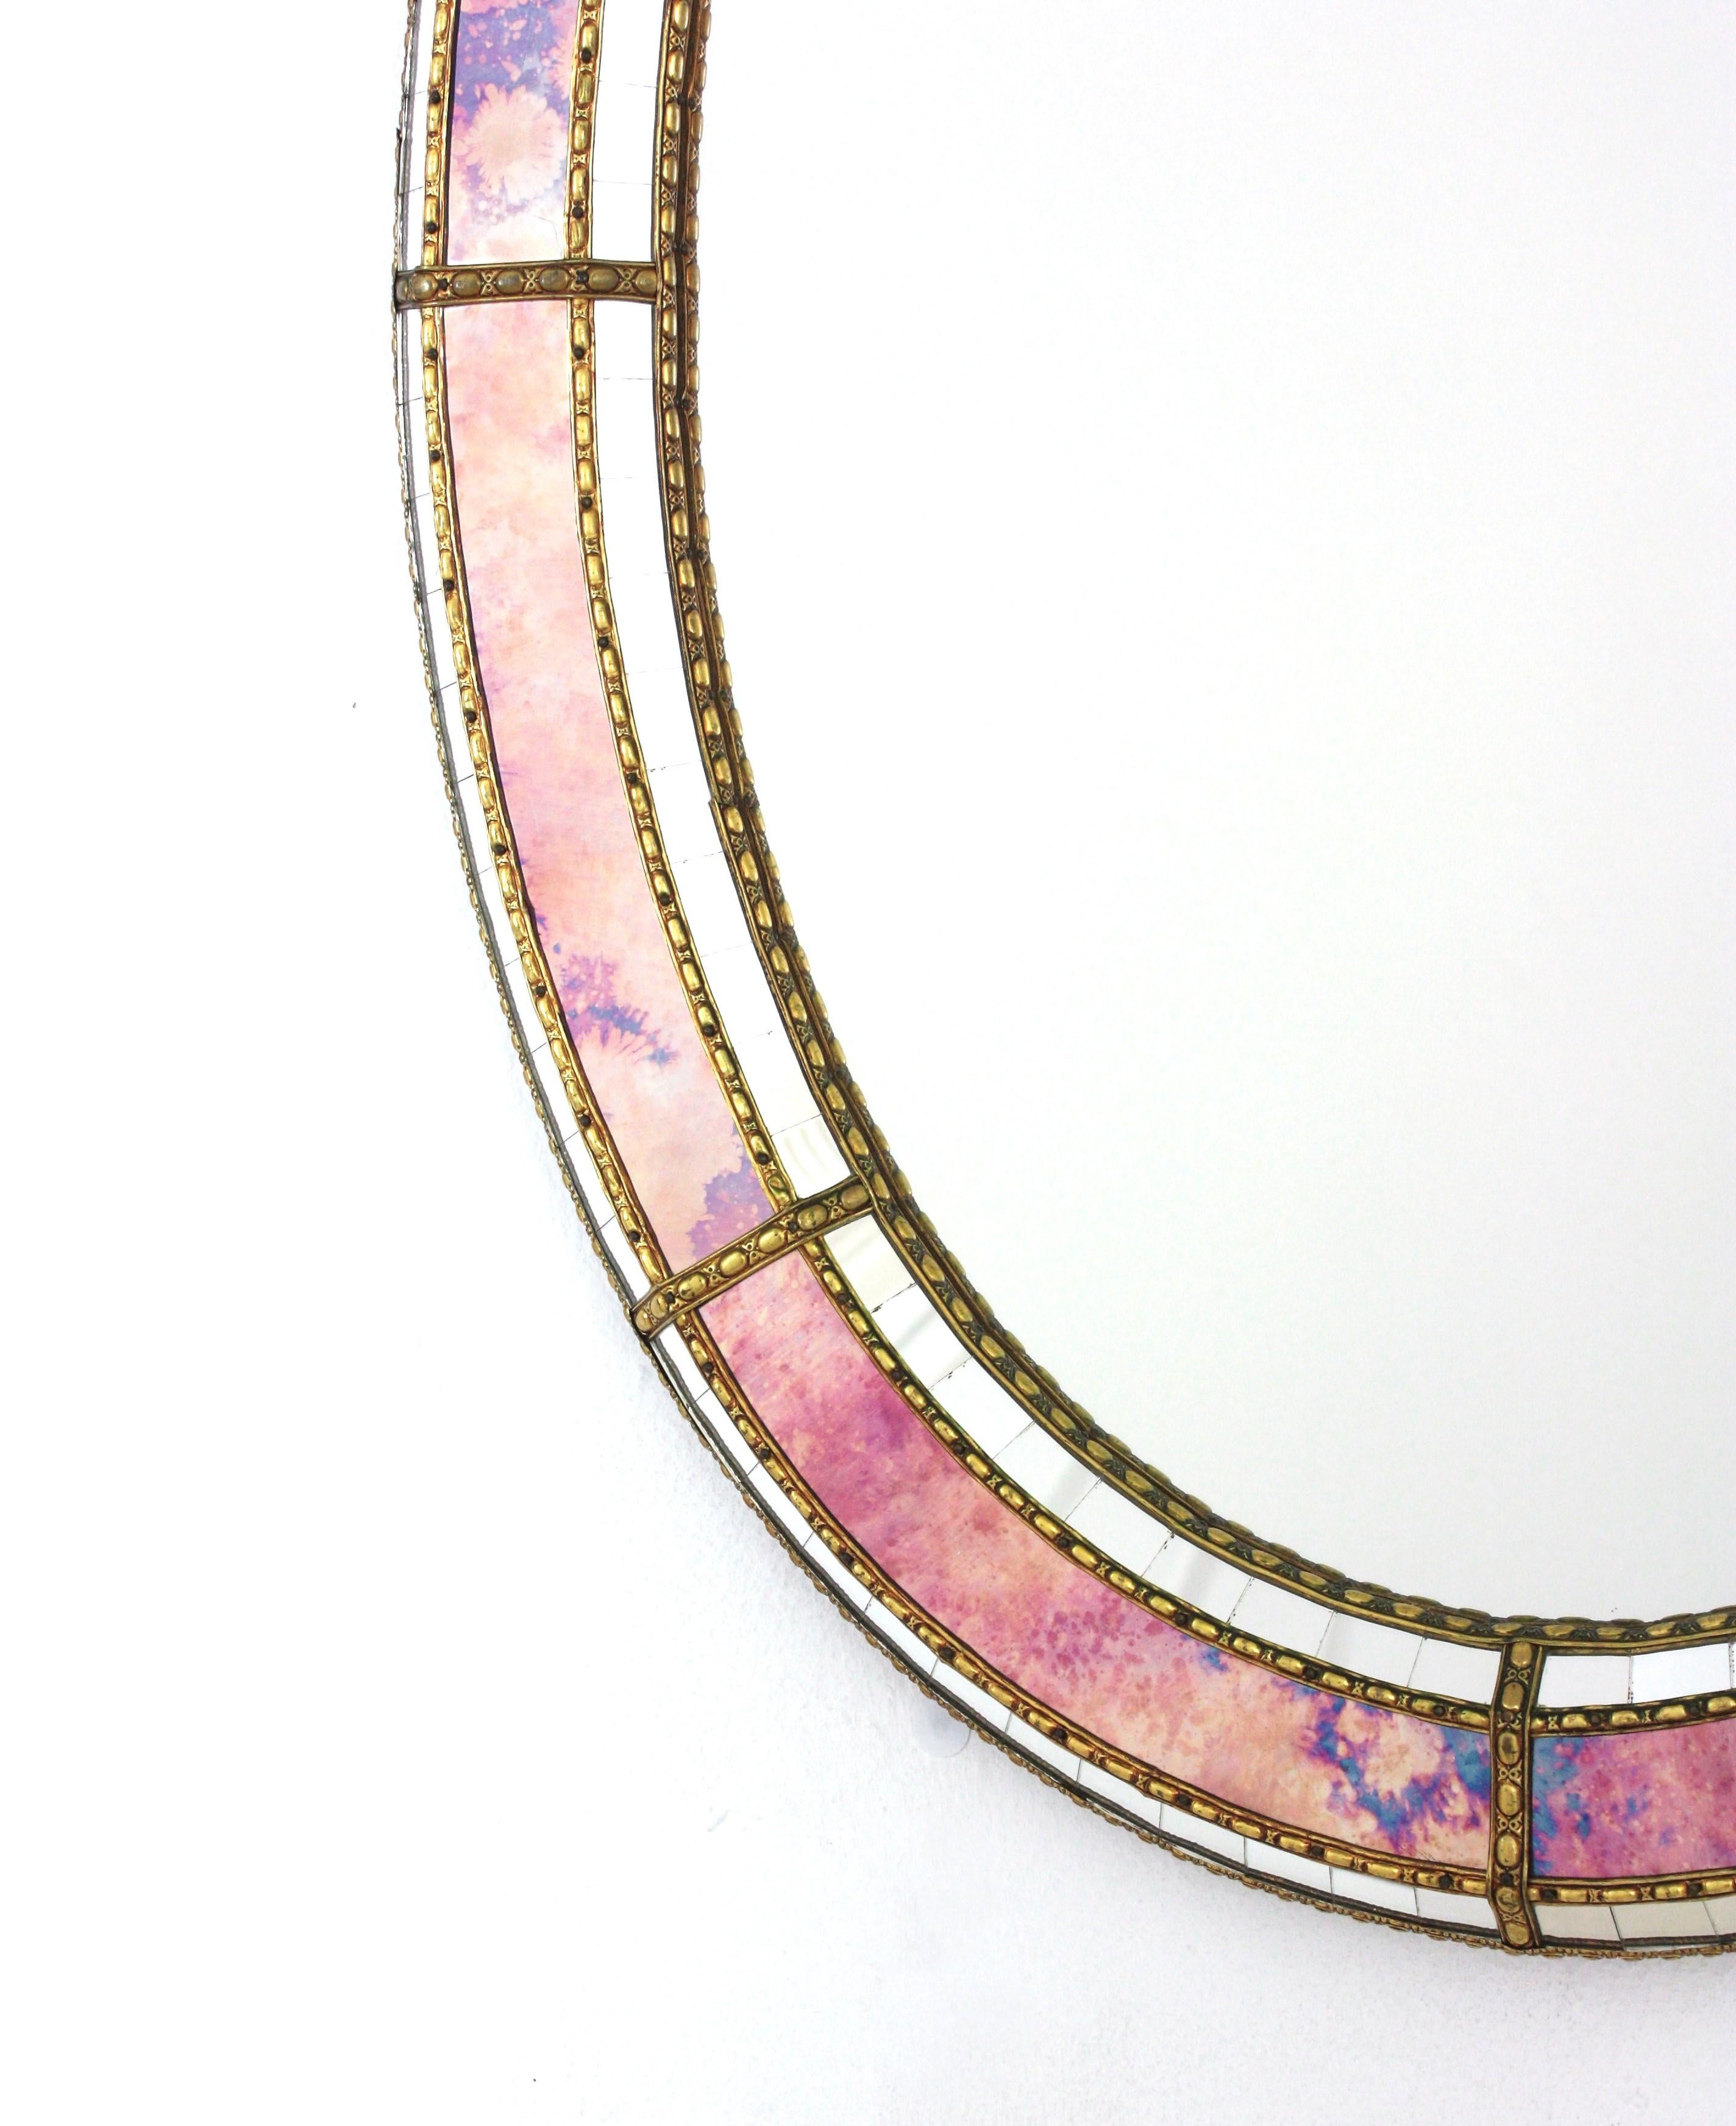 Metal Oval Venetian Style Mirror with Pink Purple Glass and Brass Details